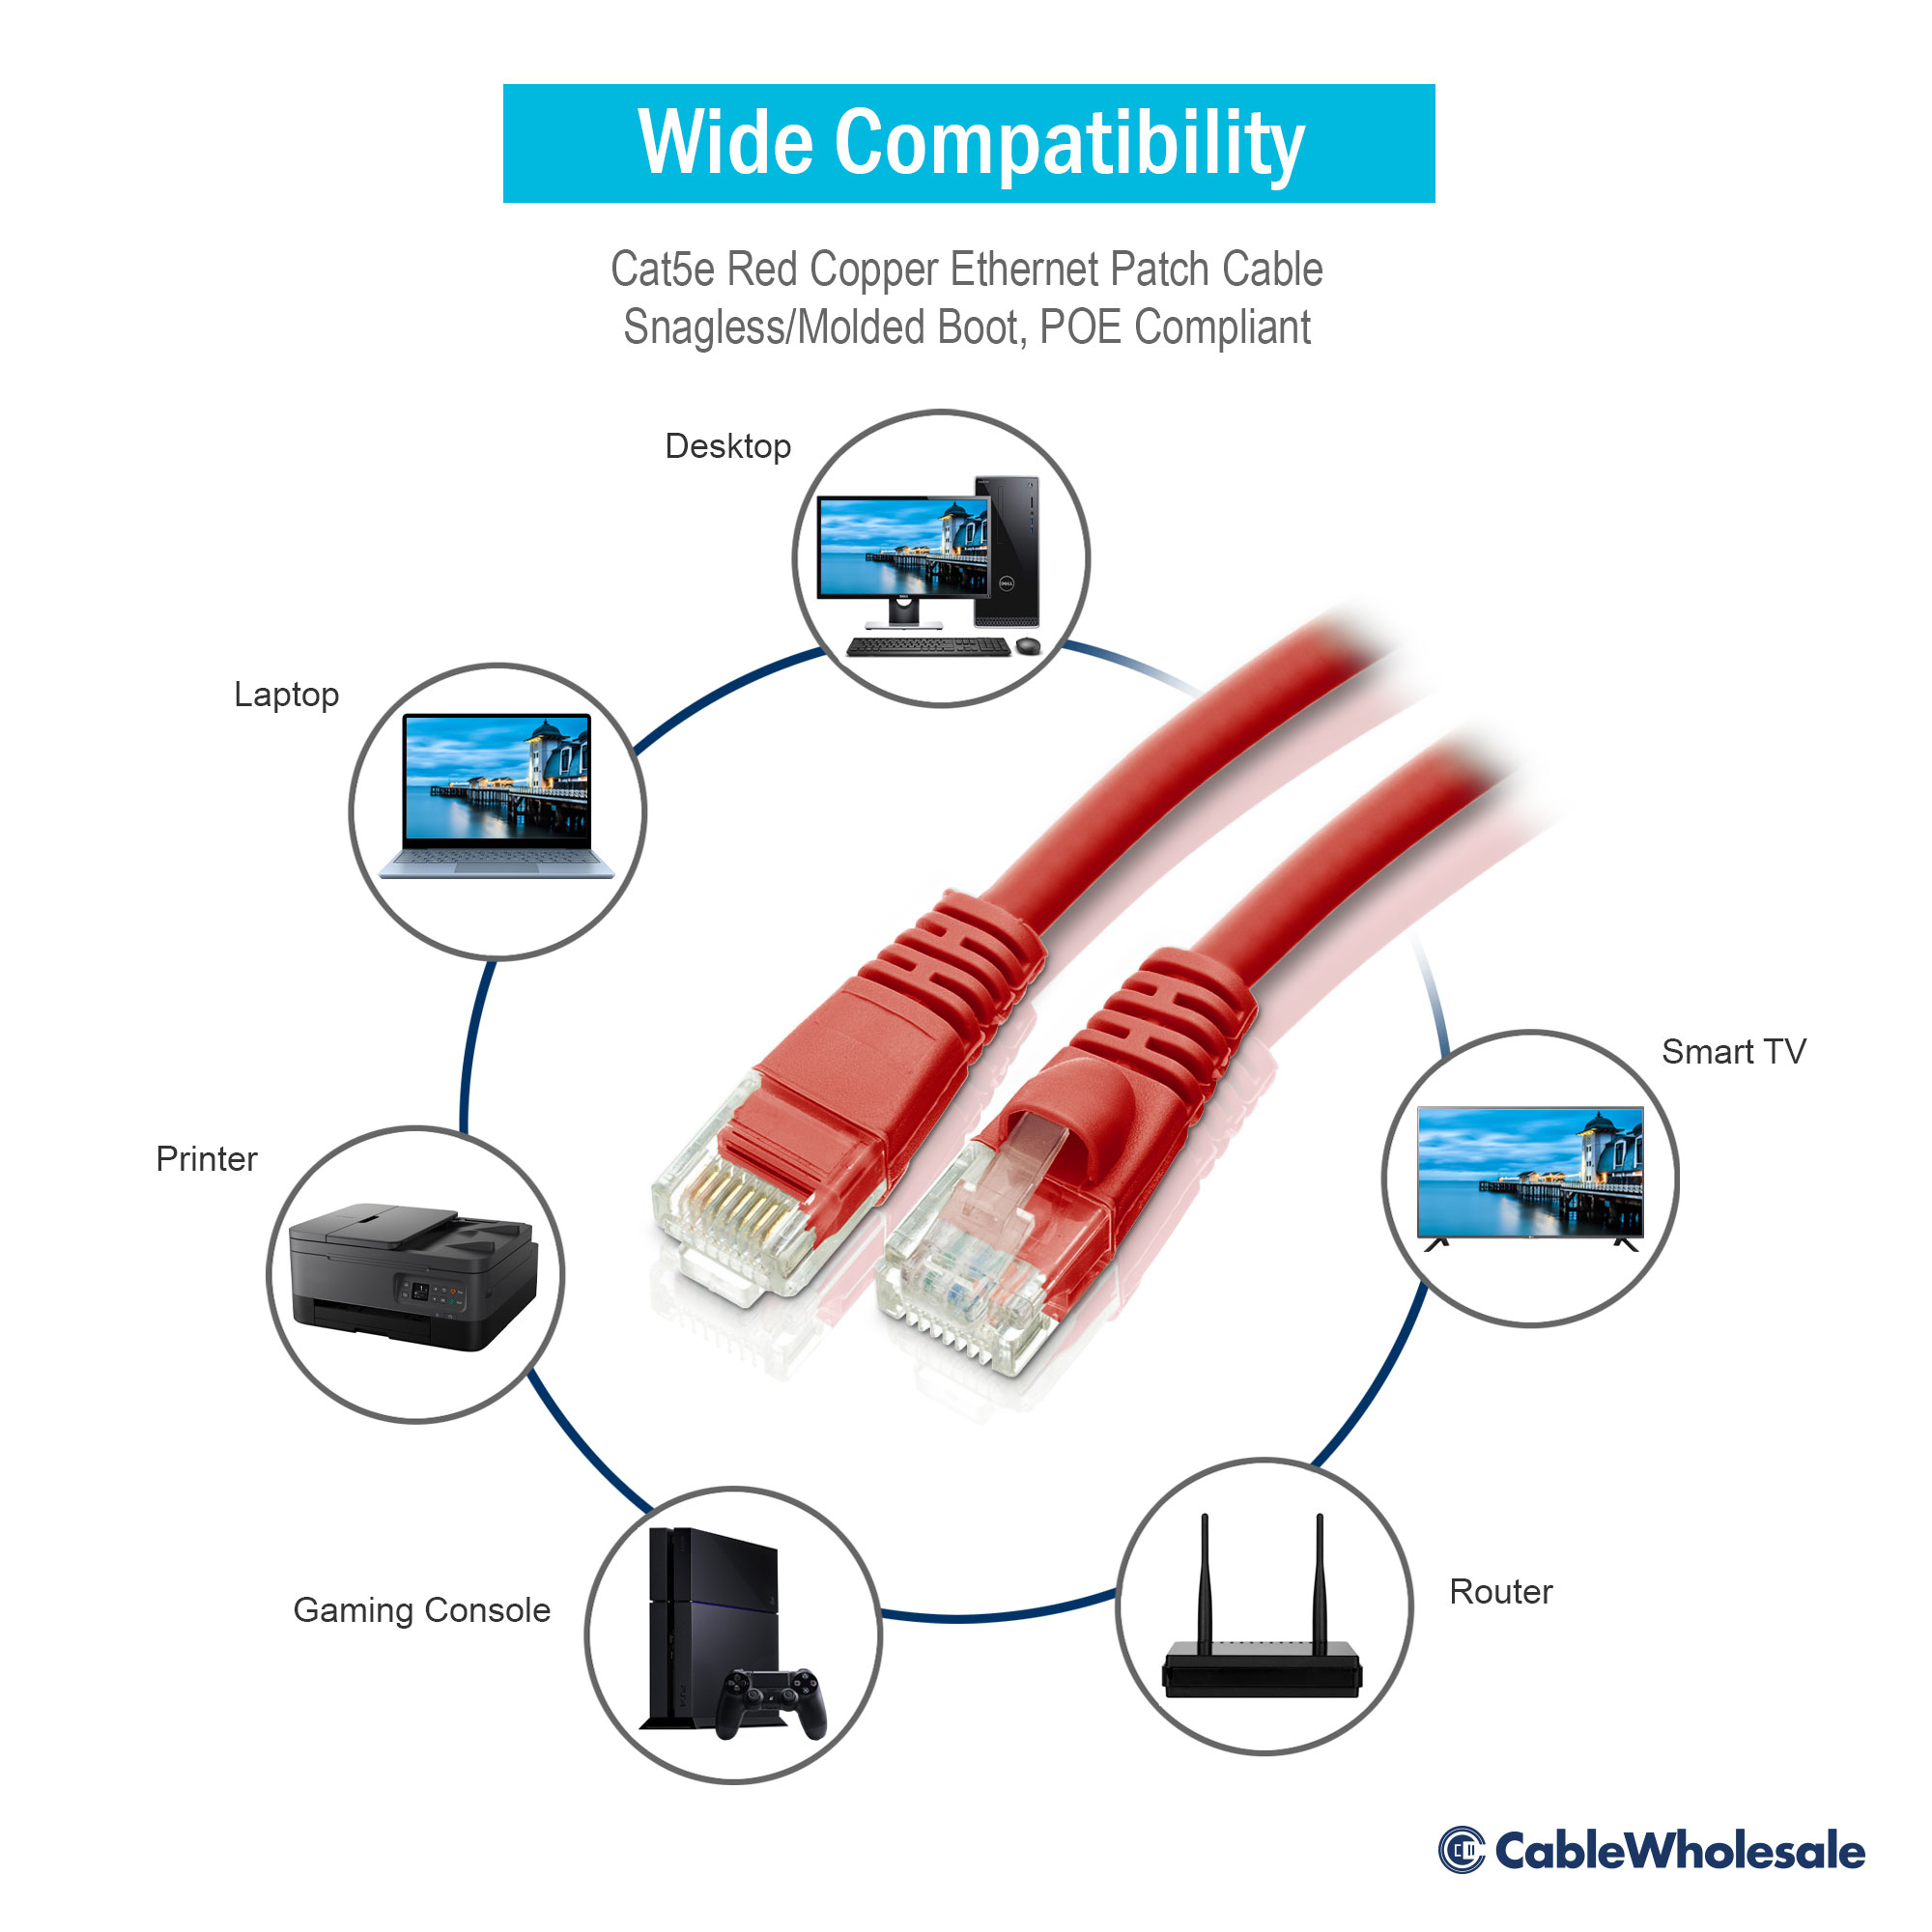 ADI PRO WBXC6ERD2MP5 CAT6e Patch Cable, RJ45, 2m, Red, 5-Pack